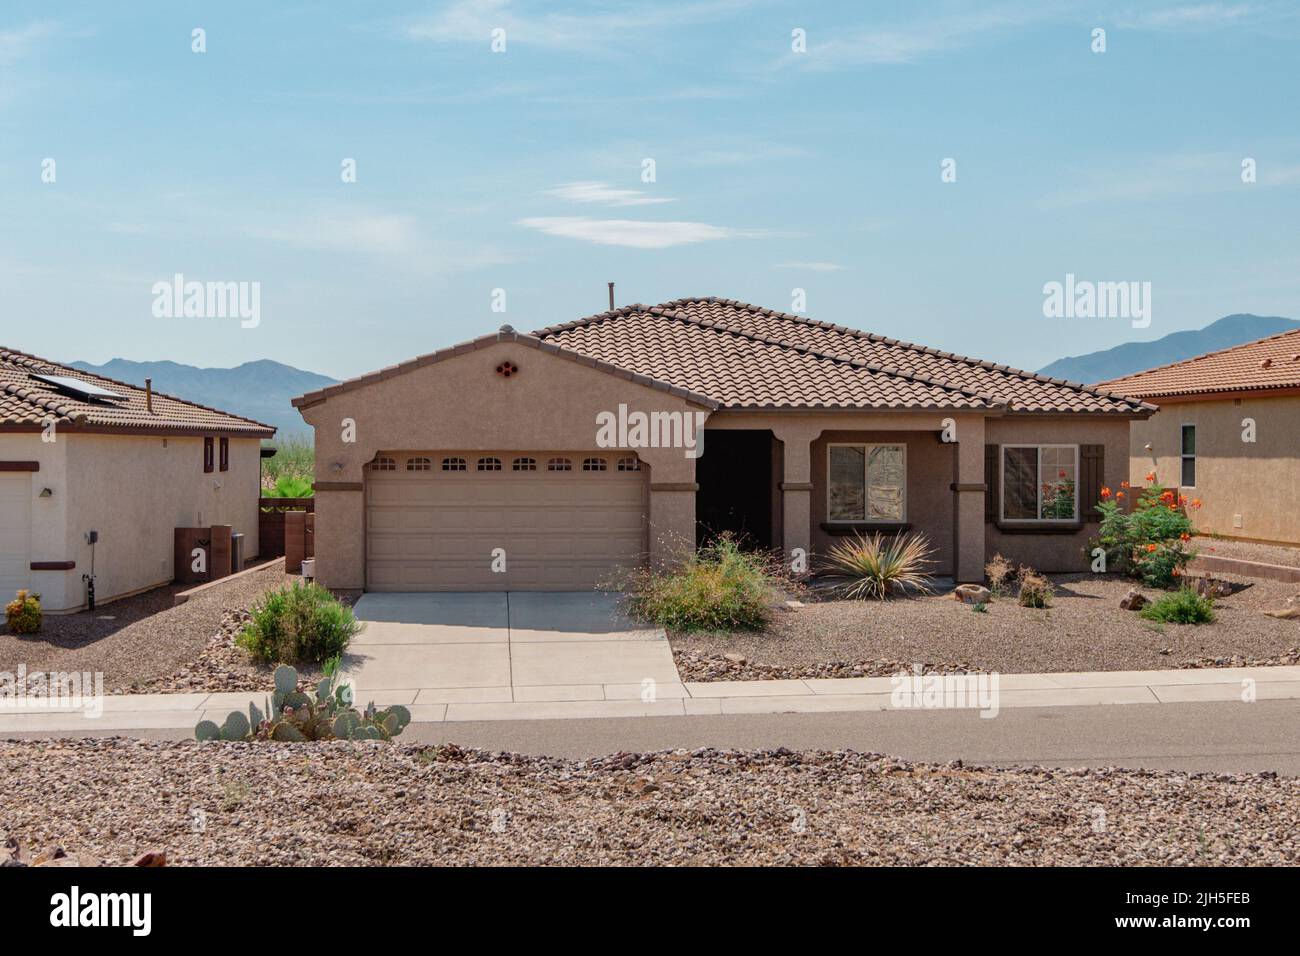 Street view of a suburban home with xeriscape landscaping. Stock Photo